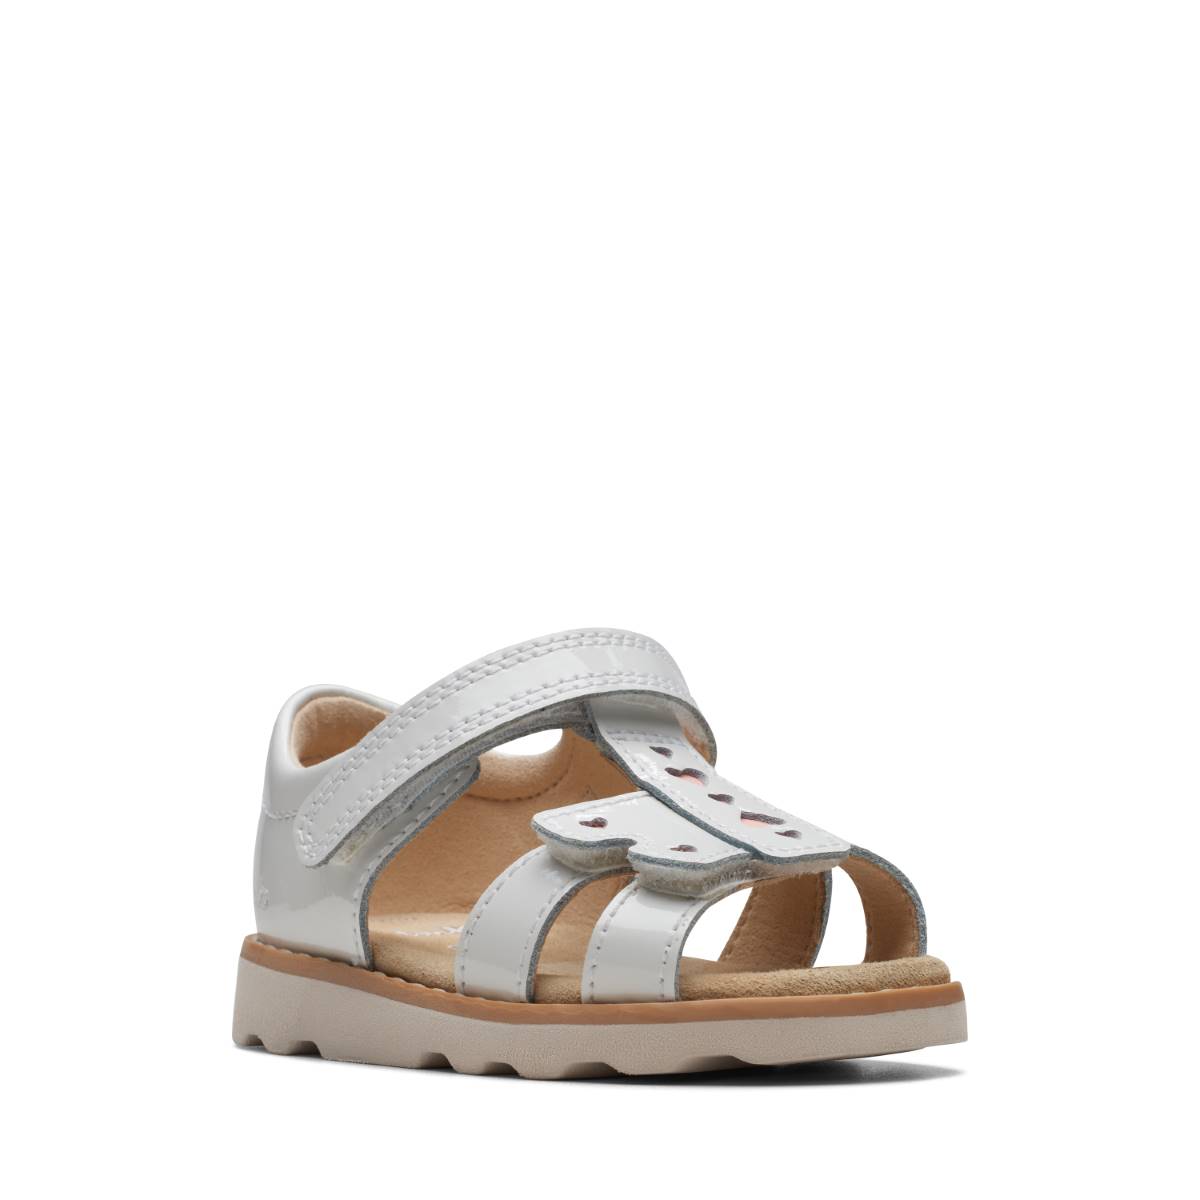 Clarks Crown Beat Zora White patent Kids sandals 7263-96F in a Plain Leather in Size 4